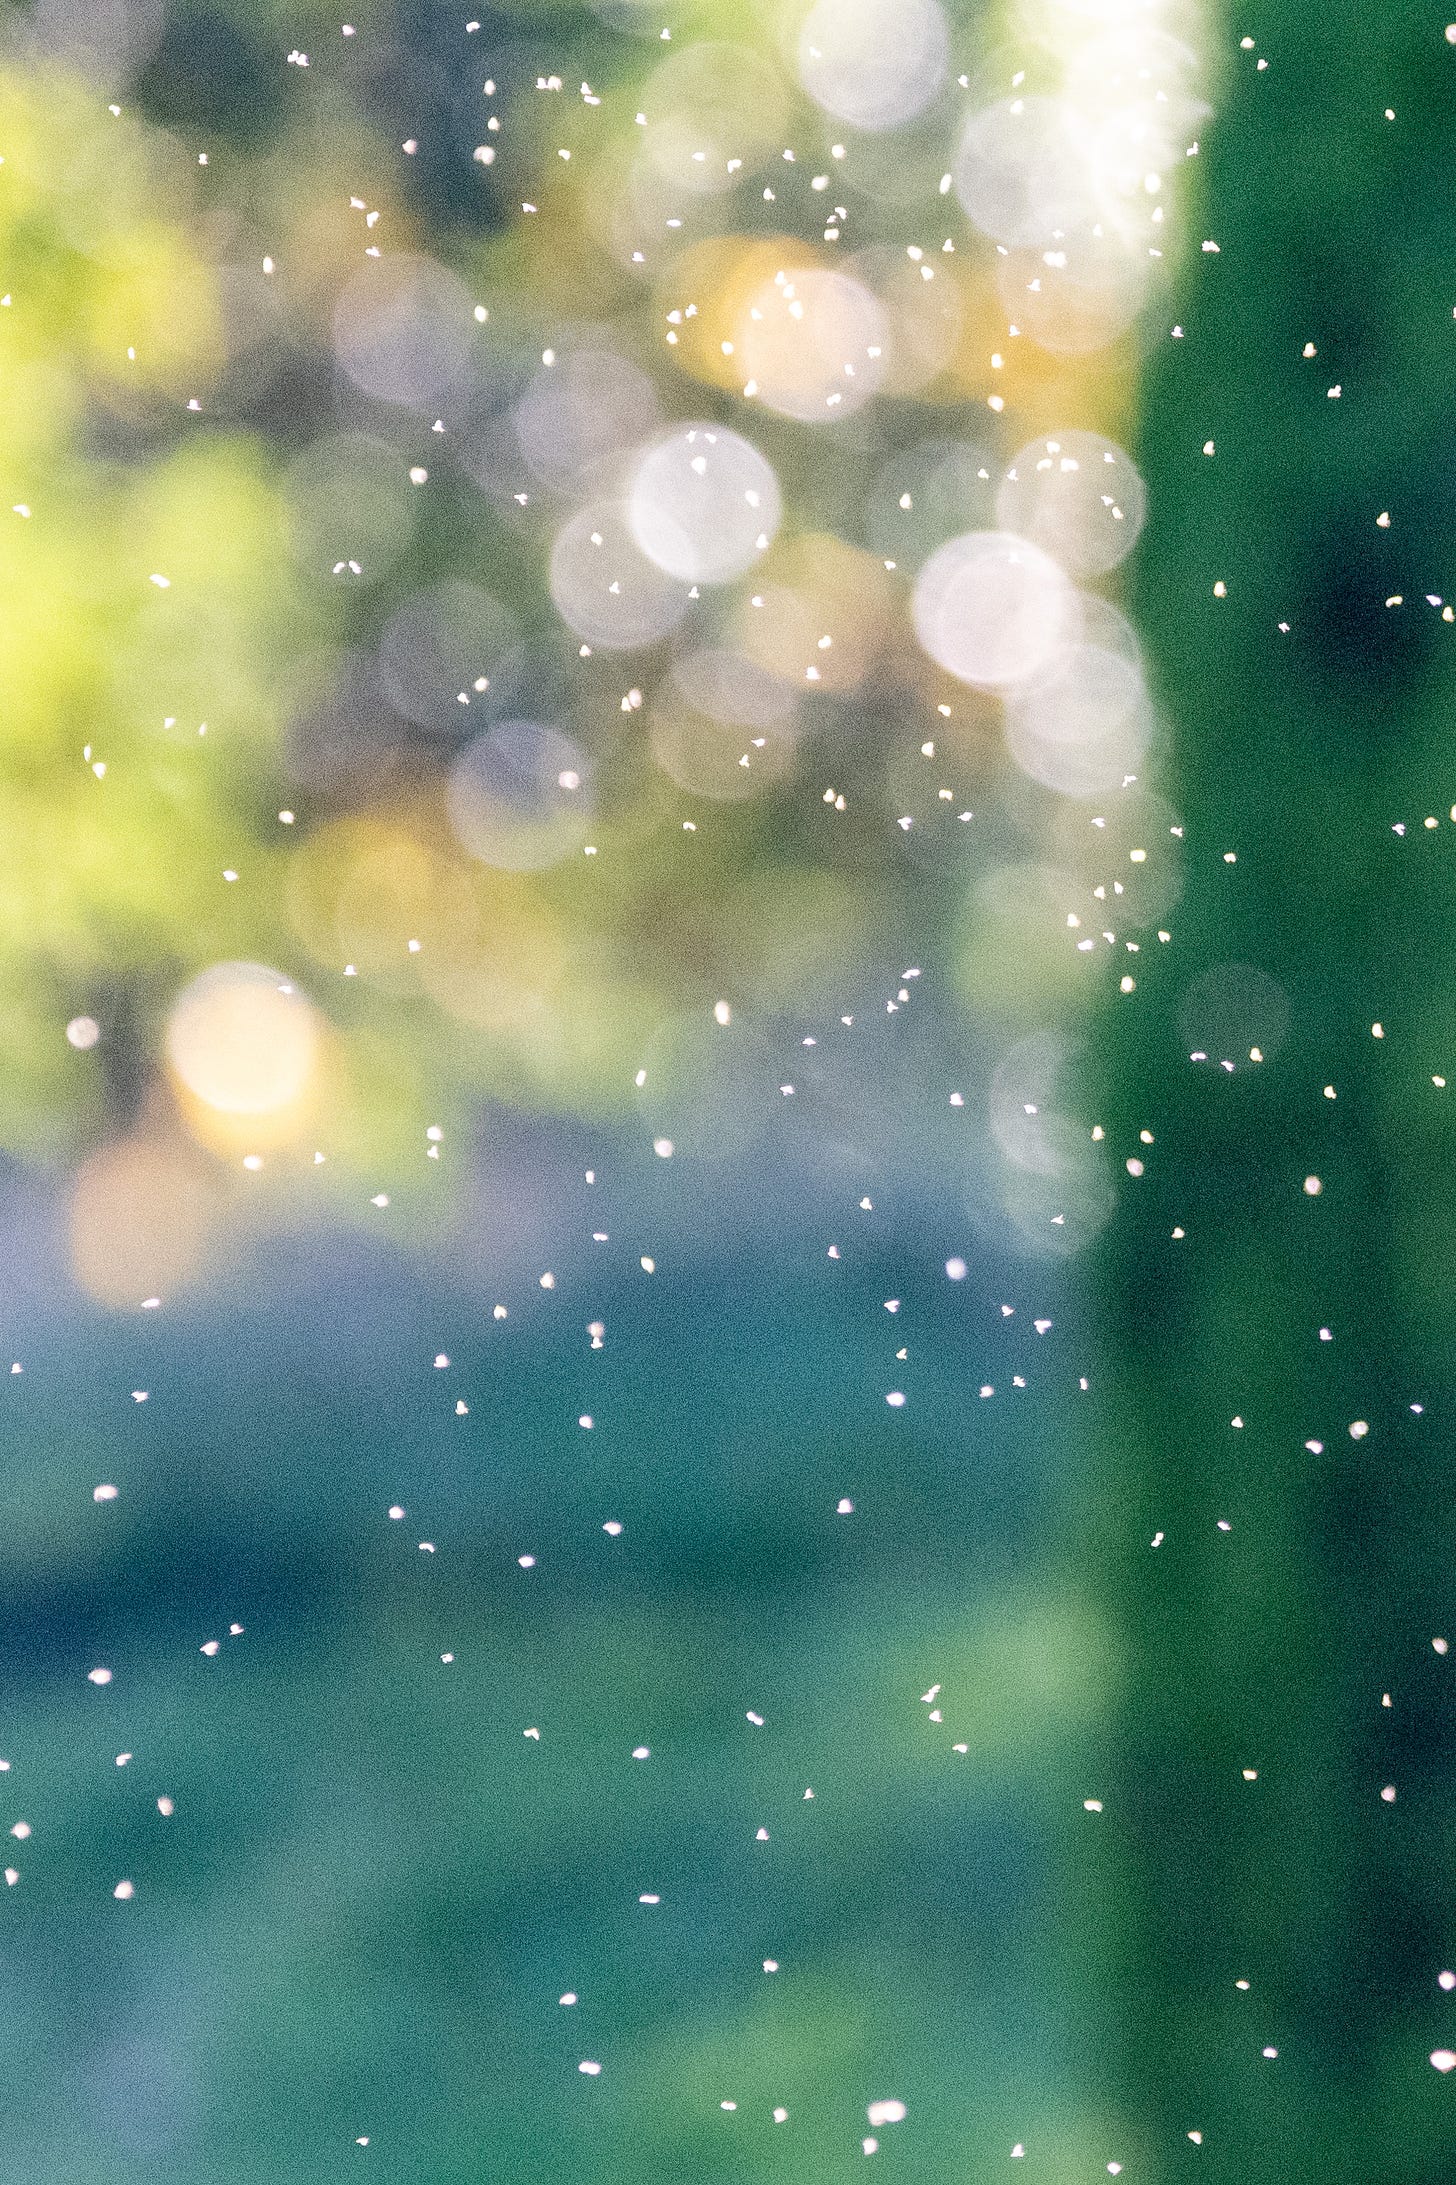 A cloud of gnats, hit by sun, against a bokeh background